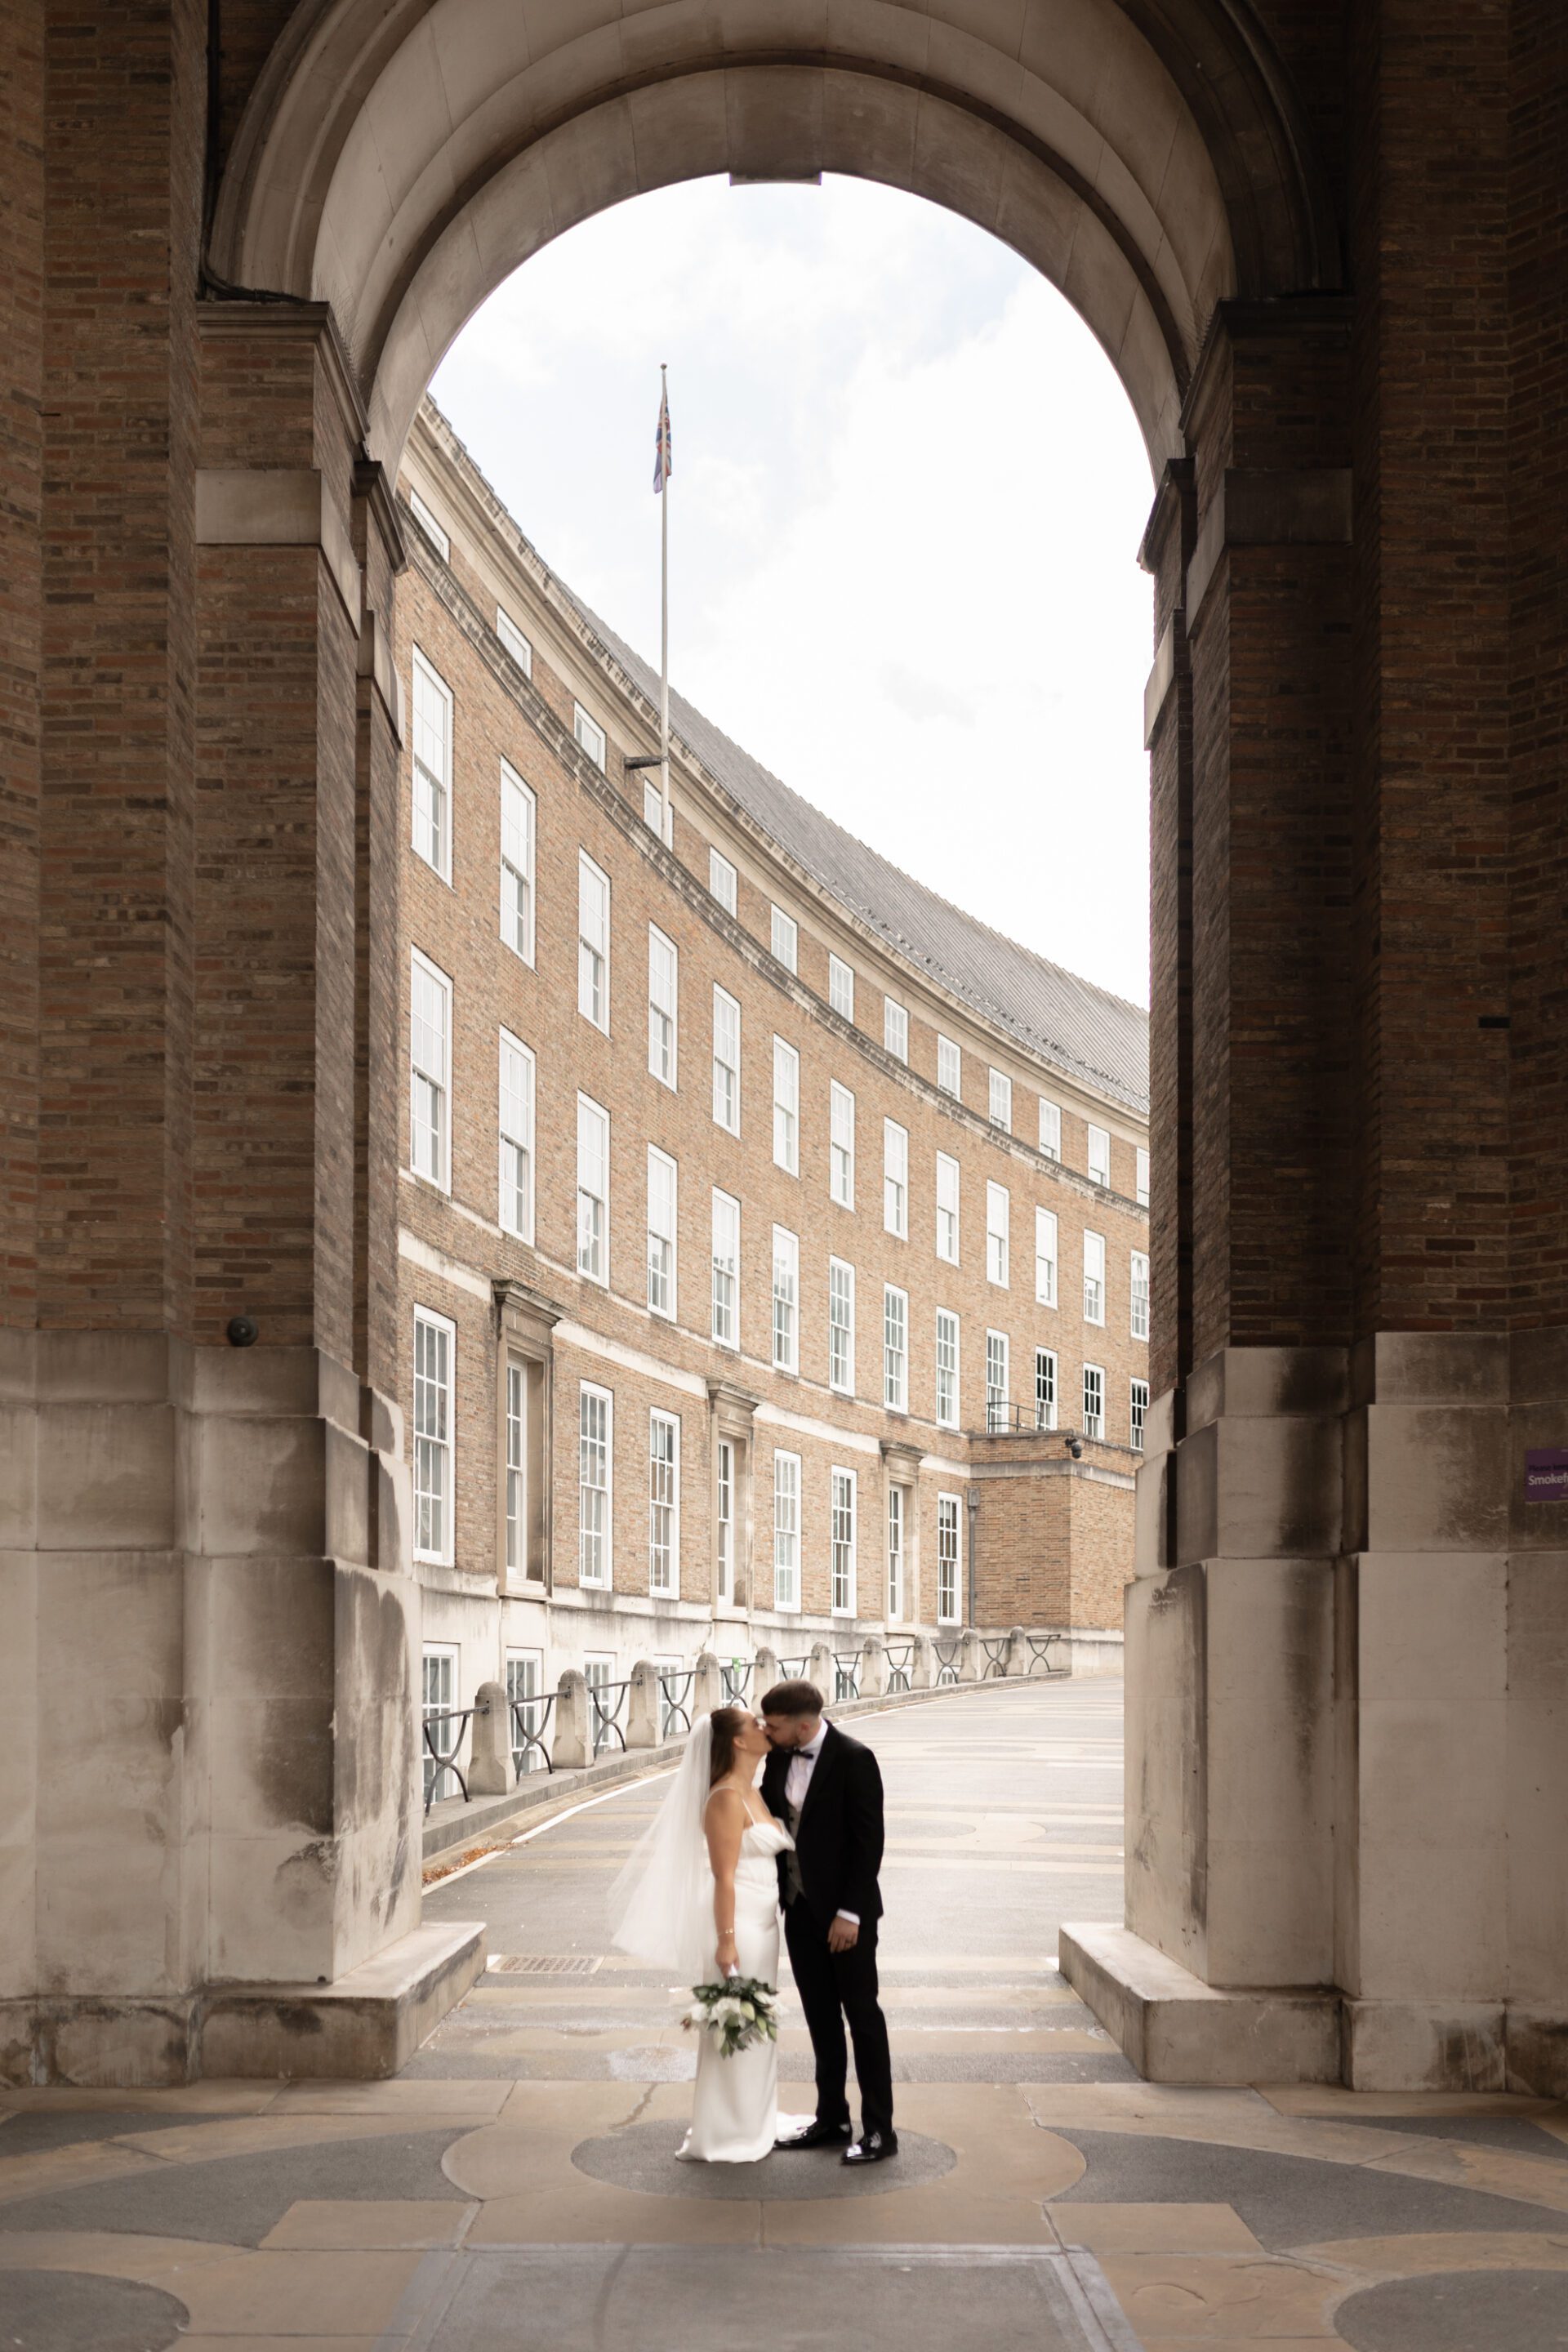 The bride and groom pose amidst Bristol's iconic architecture during our couple portrait session